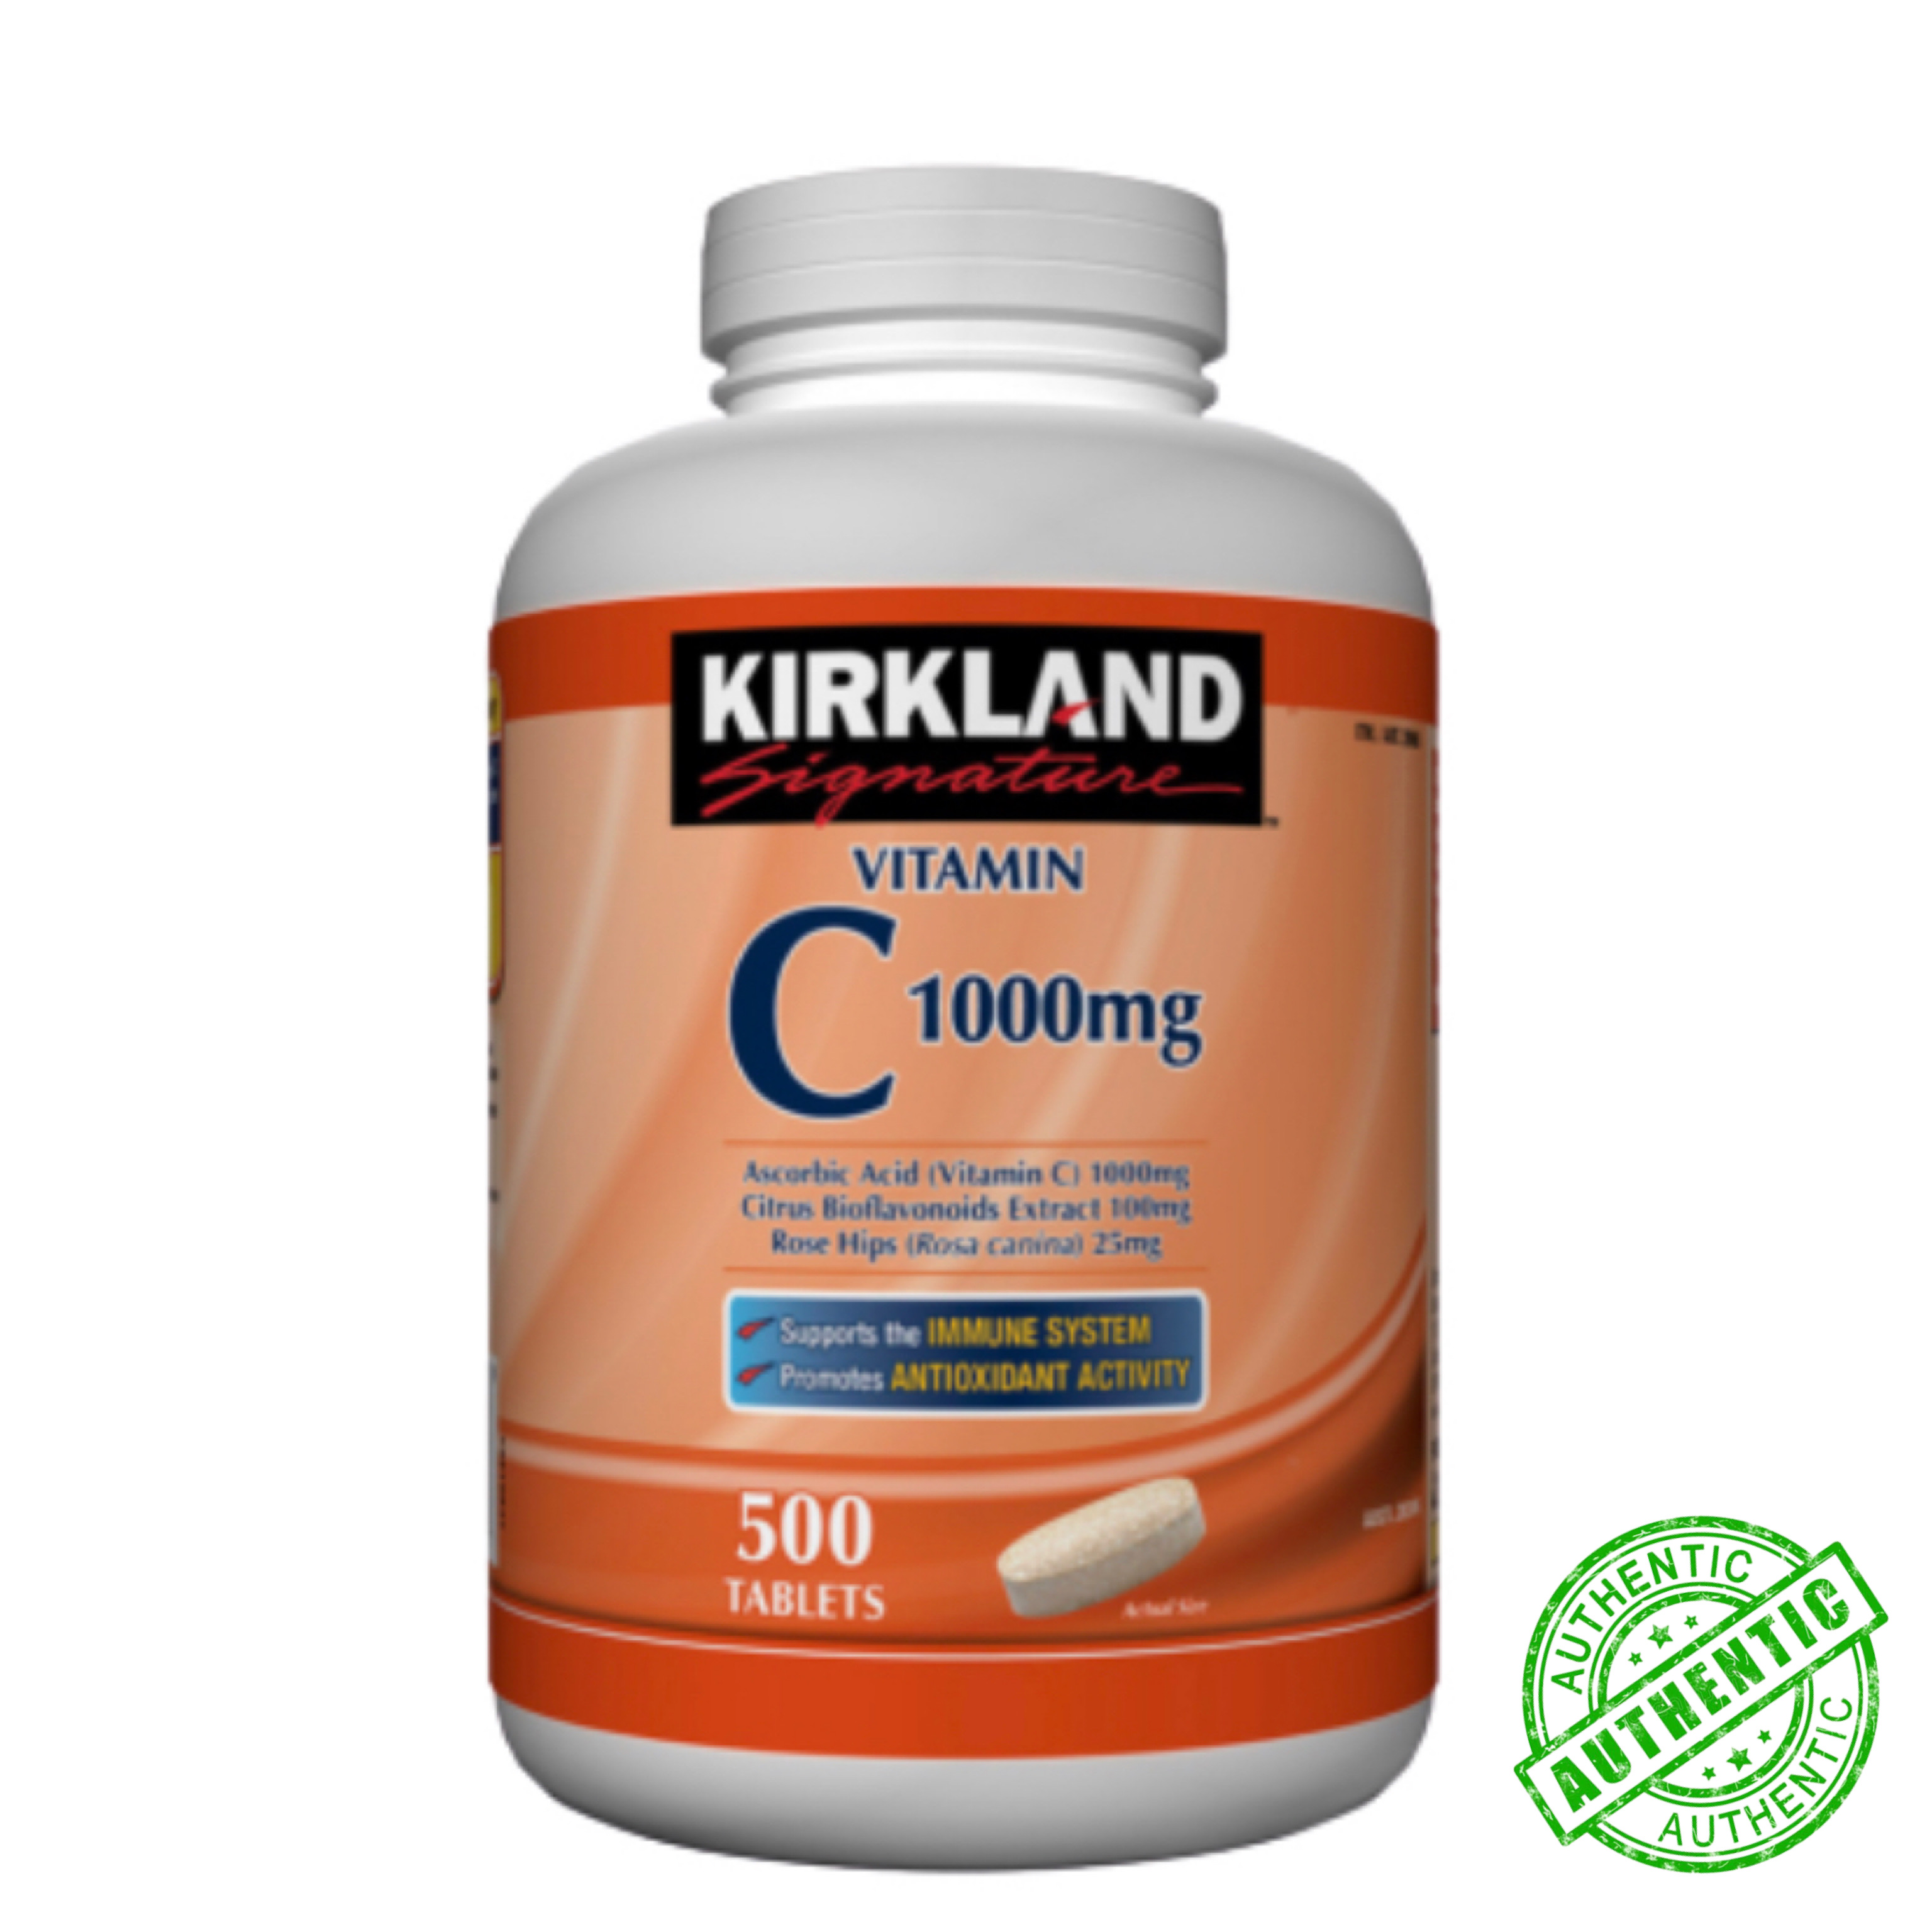 Kirkland Imported Kirkland Signature Vitamin C With Citrus Bioflavonoids Extract And Rose Hips 500 Tablets 1000mg Lazada Ph